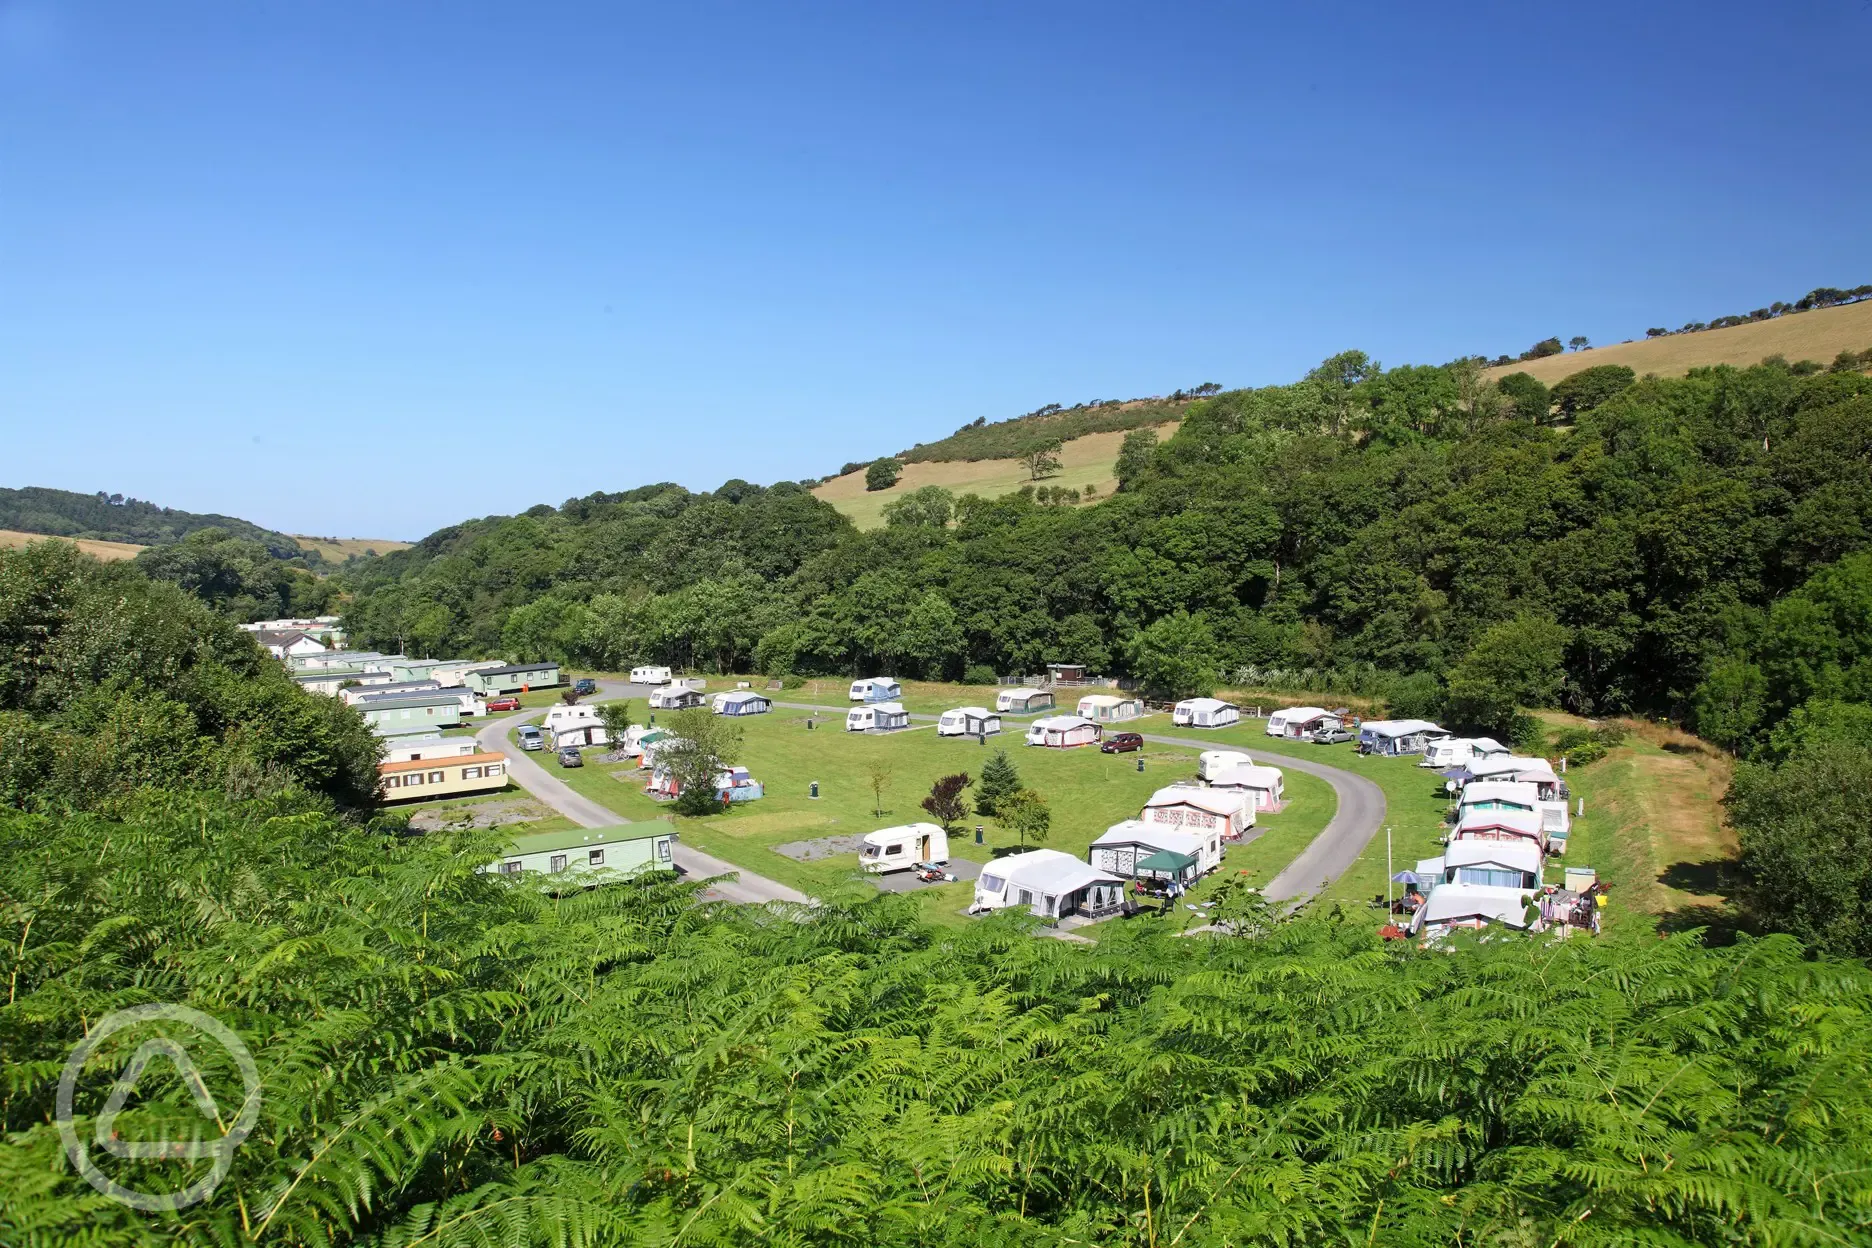 View of Touring and Motorhome Pitches